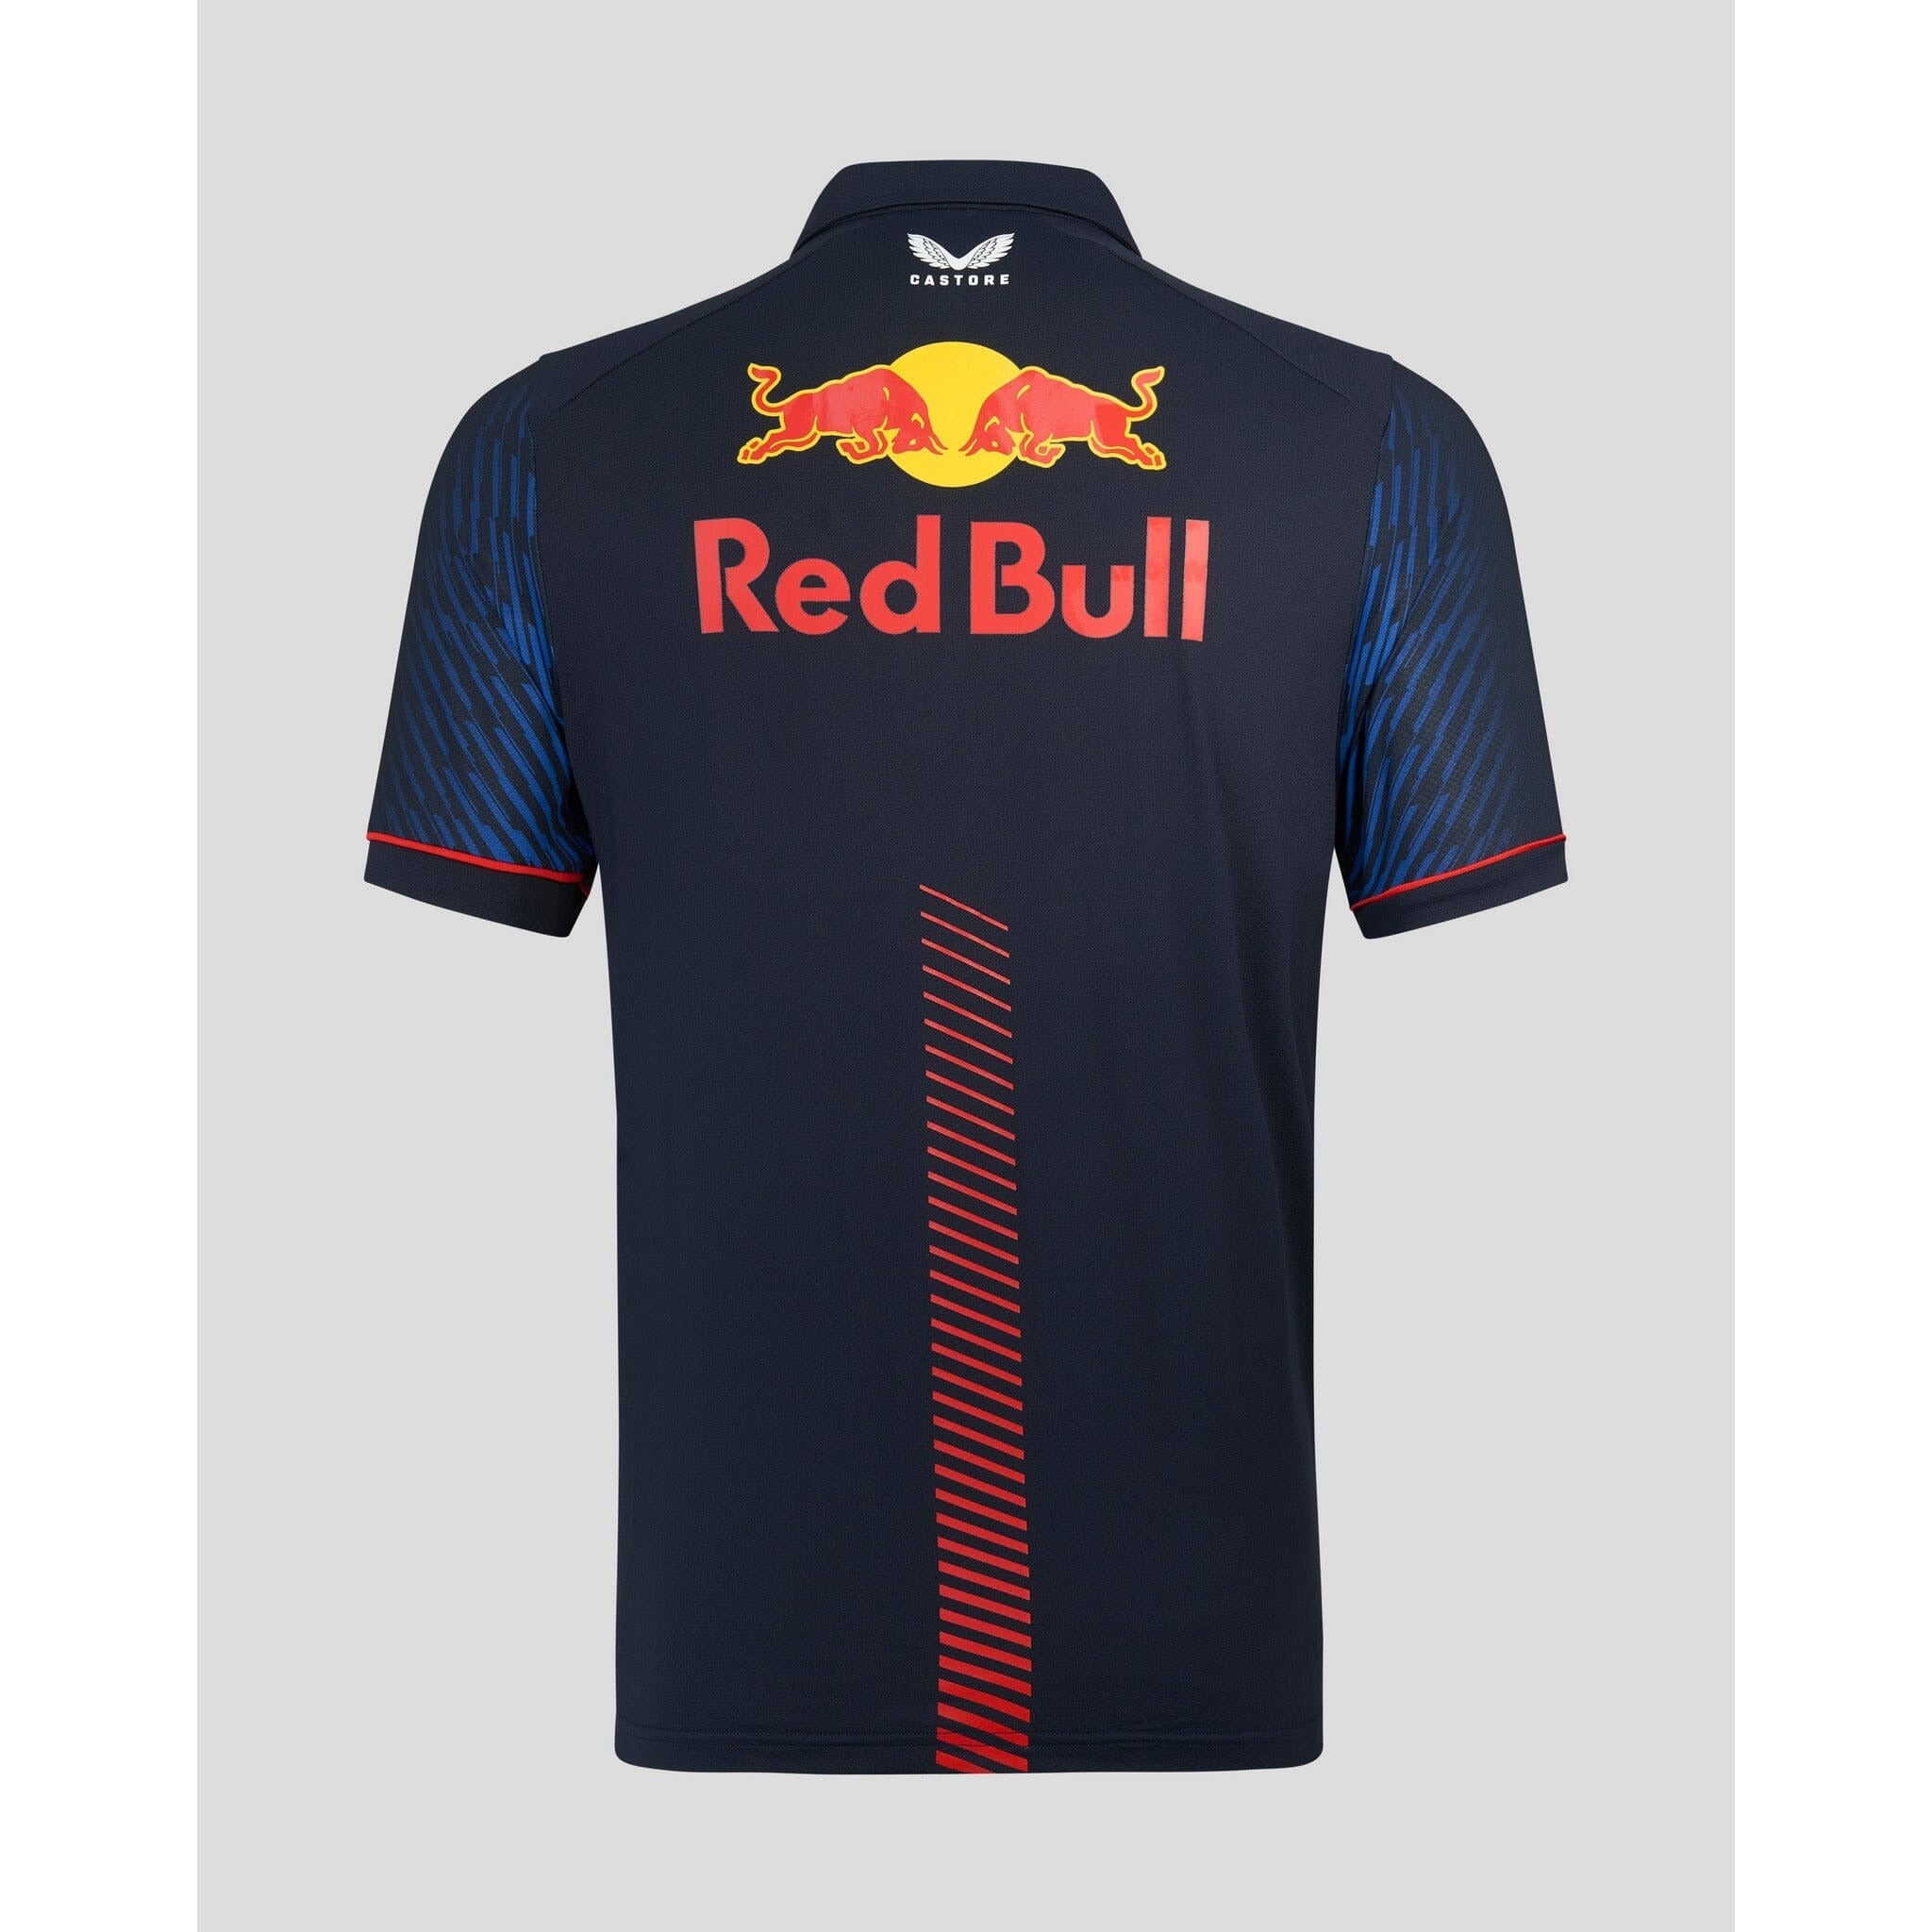 Shop for Max Verstappen World Champion Formula One Racing Tshirt Online in  India.